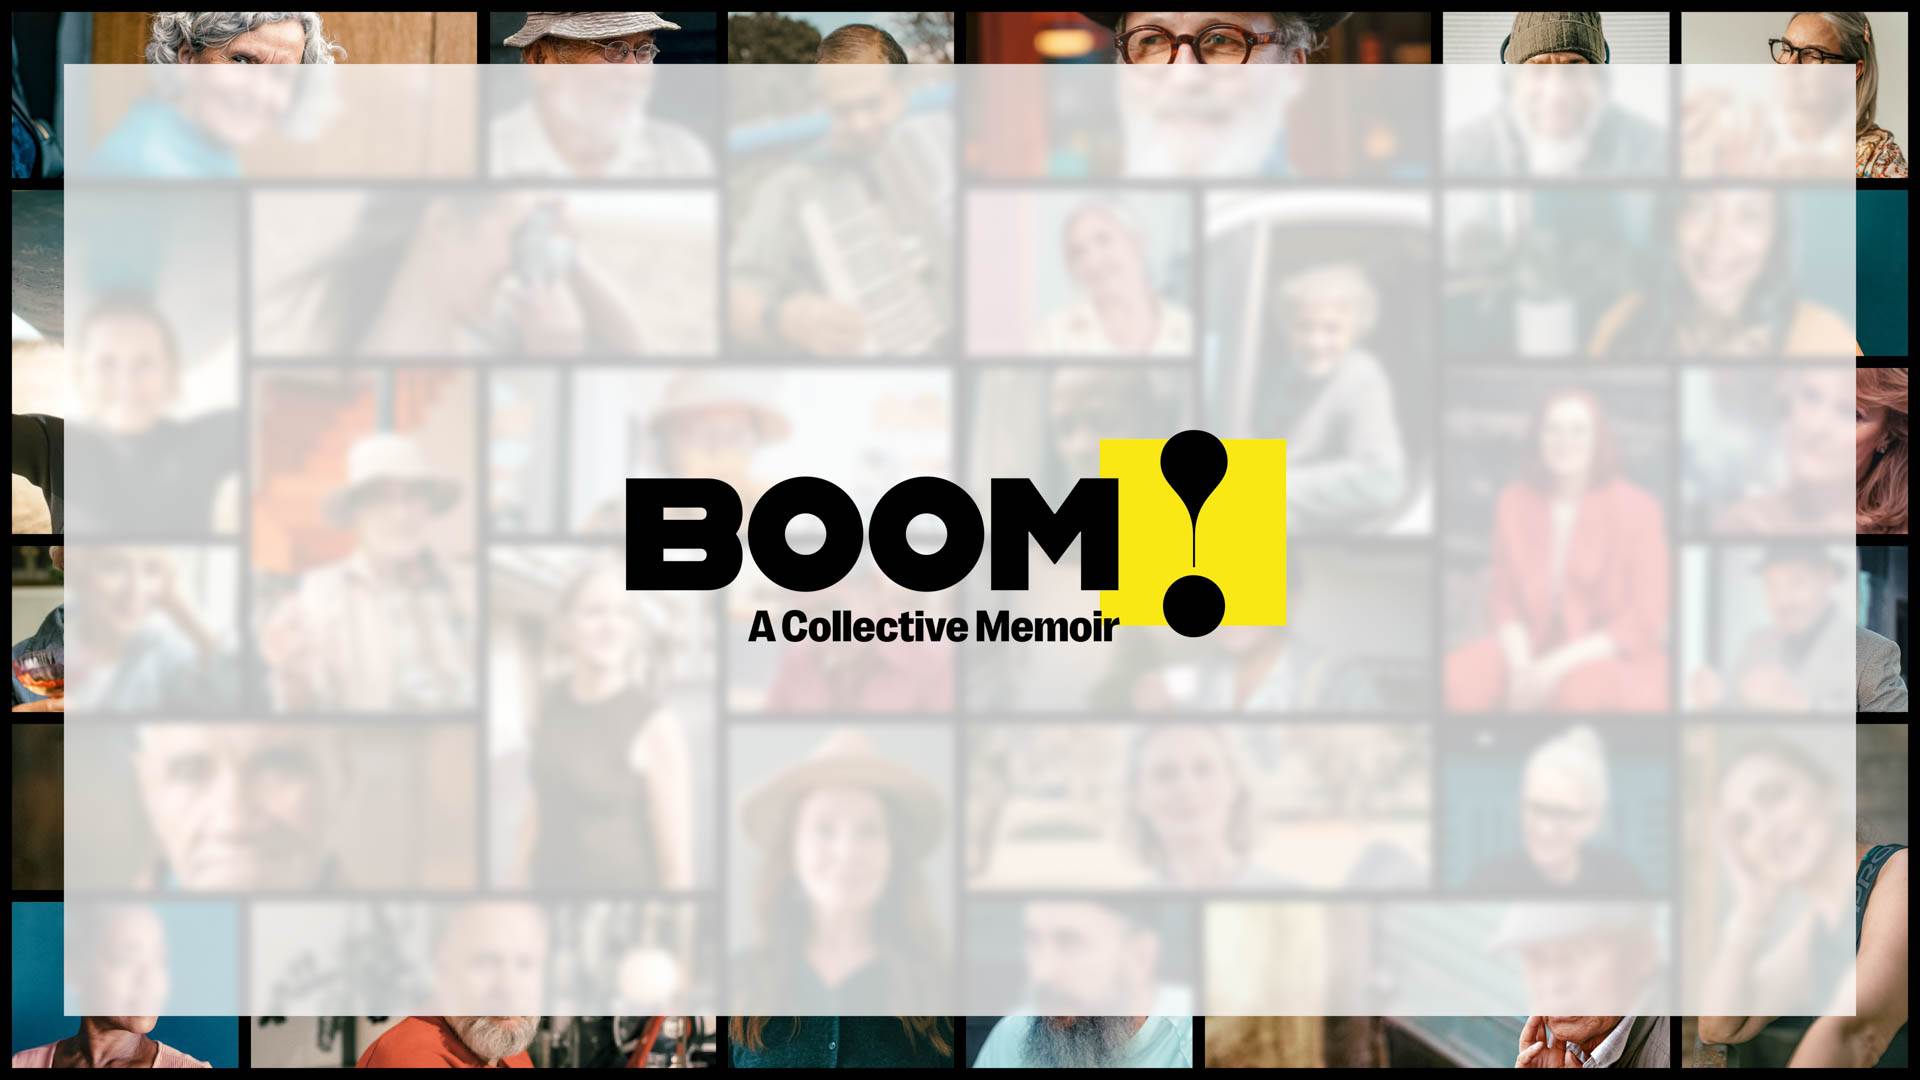 the Boom logo with portraits in the background